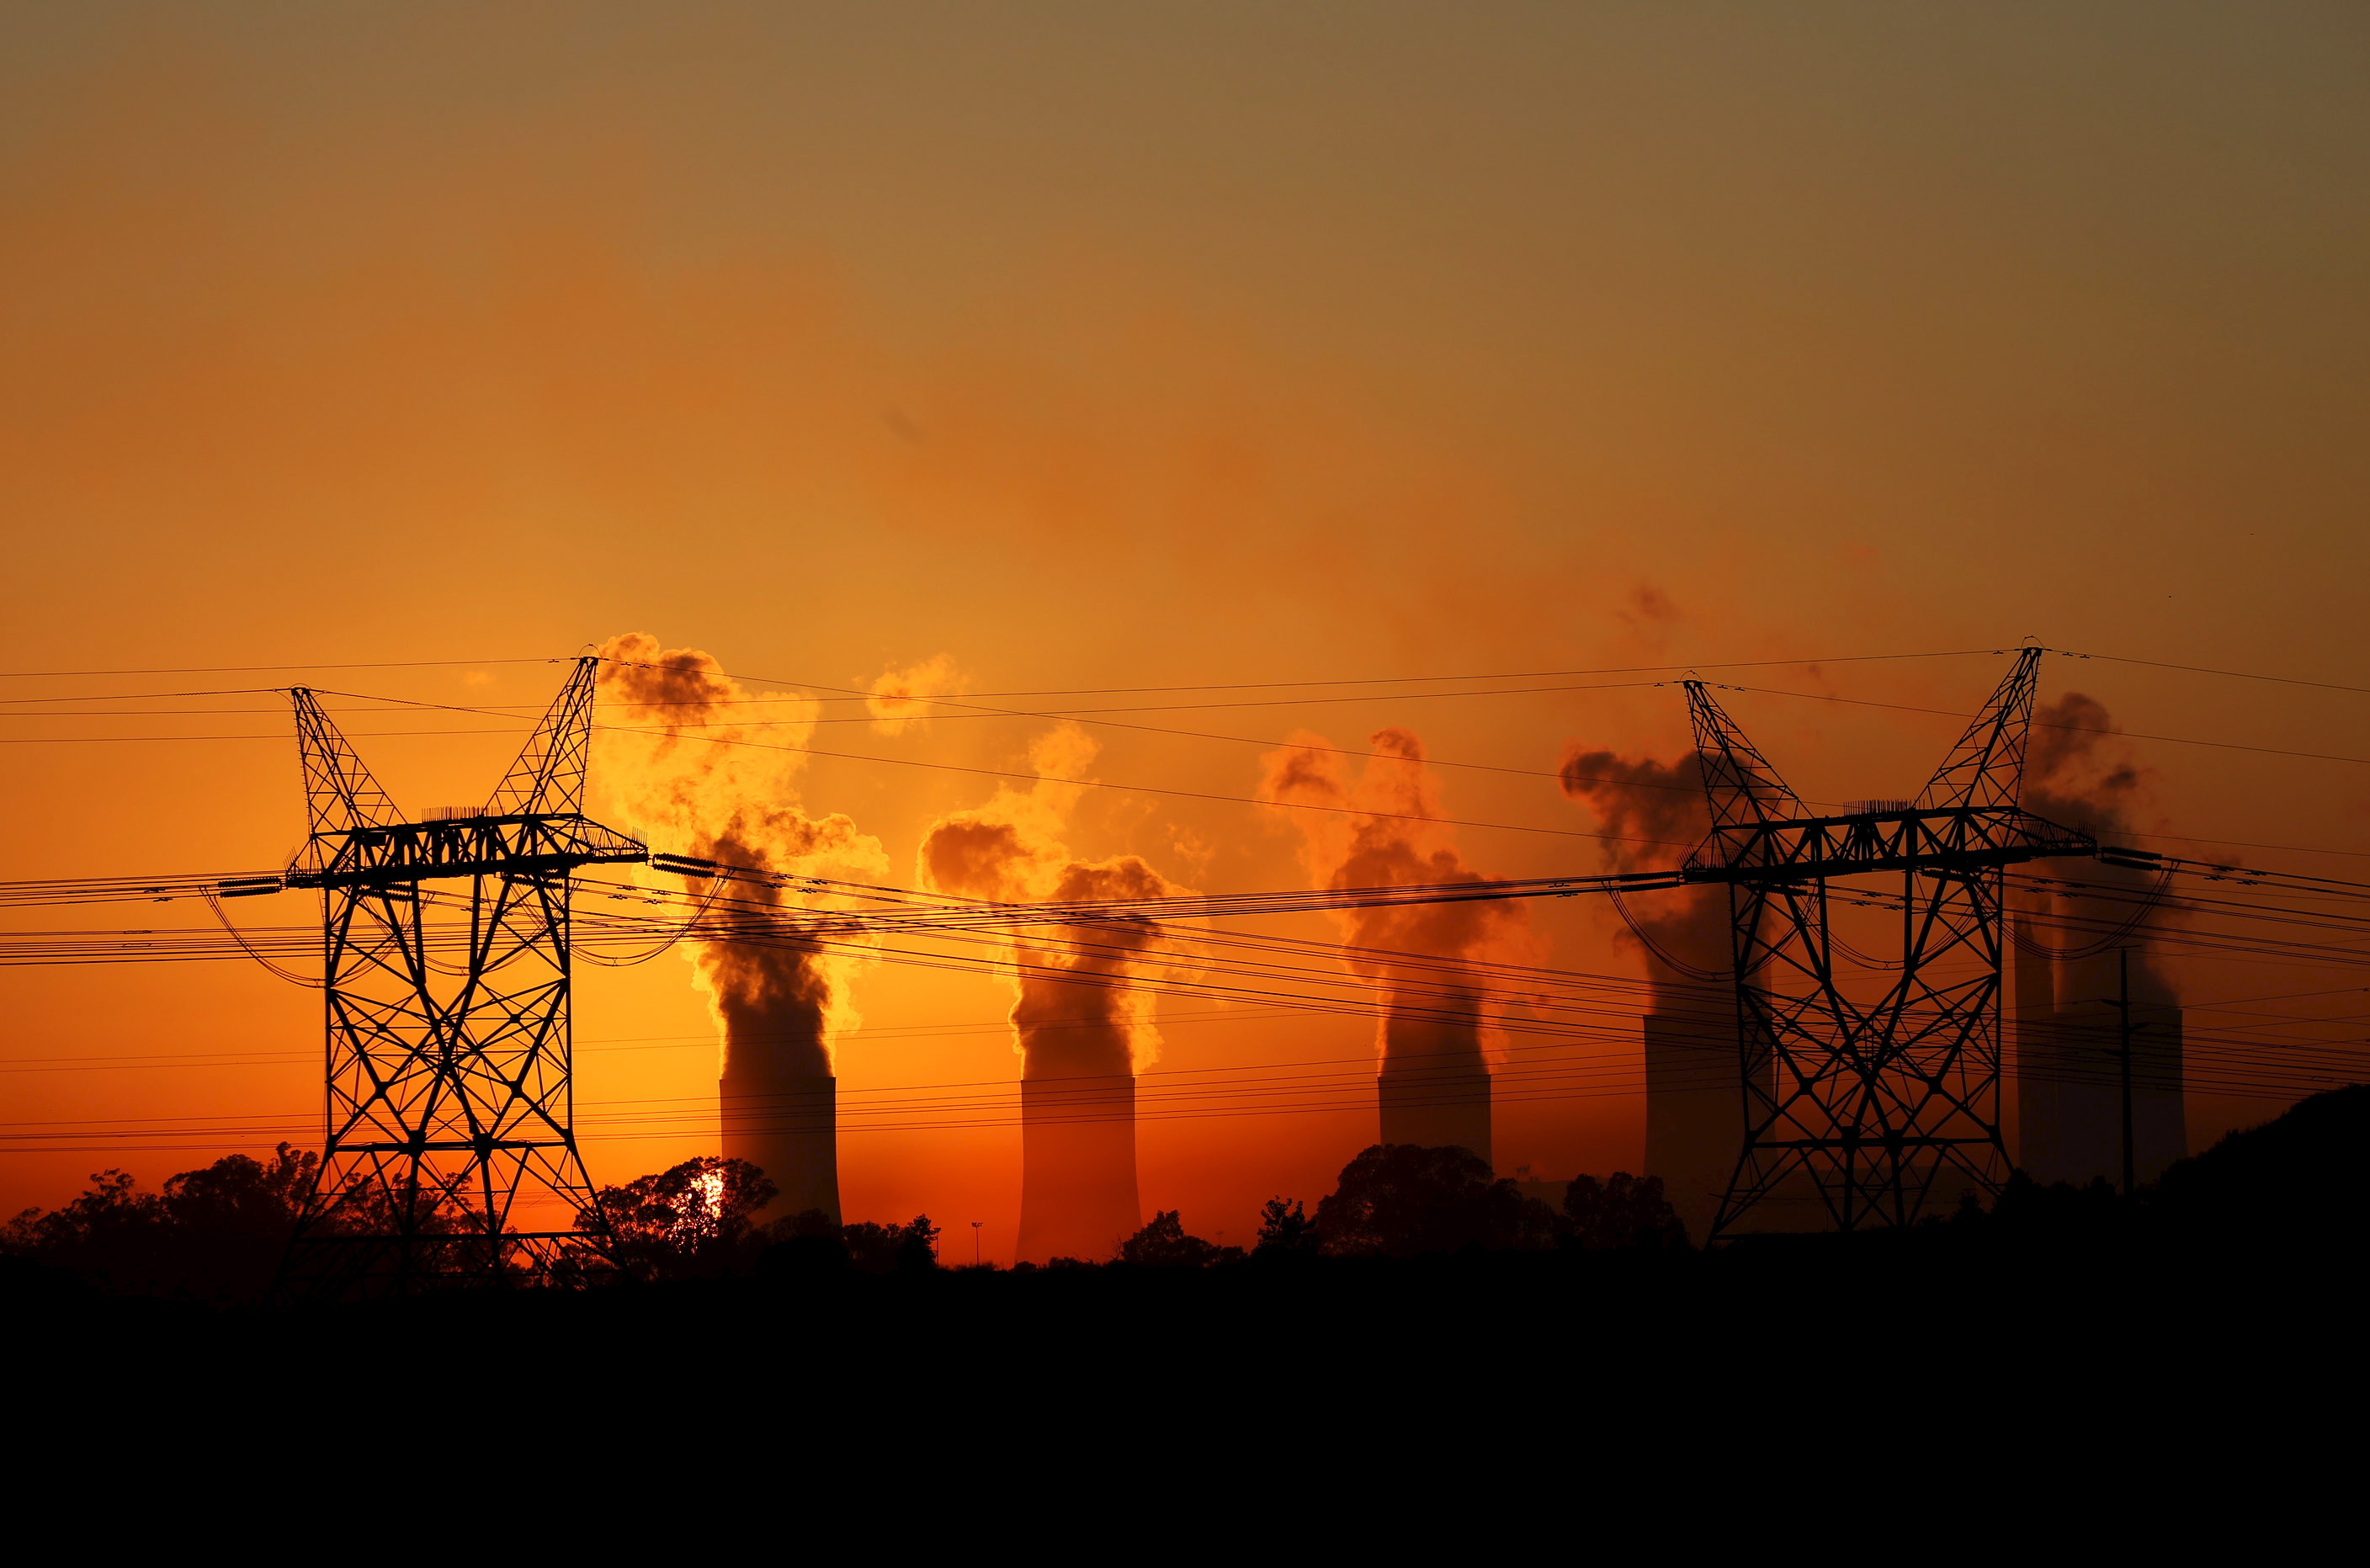 electricity pylons are seen in front of the cooling towers photo reuters